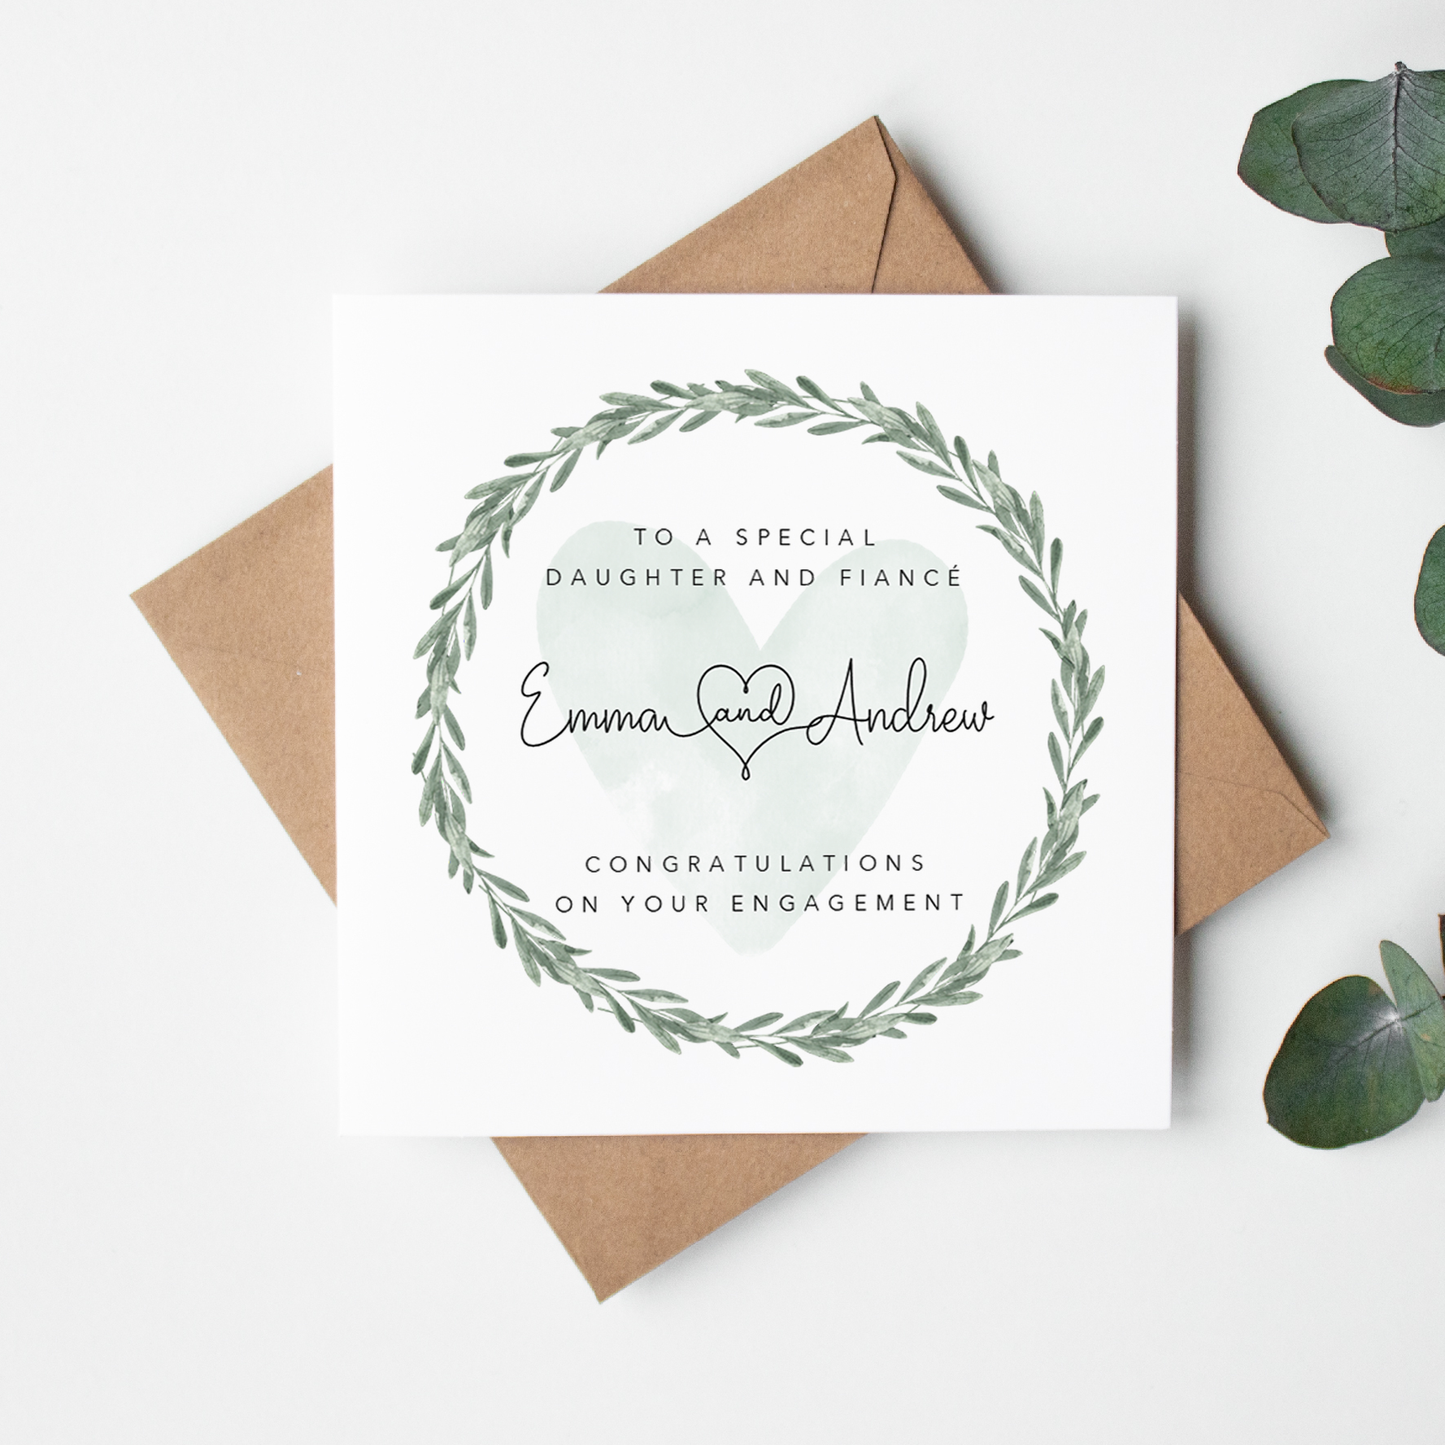 Green Eucalyptus Engagement Card for Daughter and Fiance/Fiancee